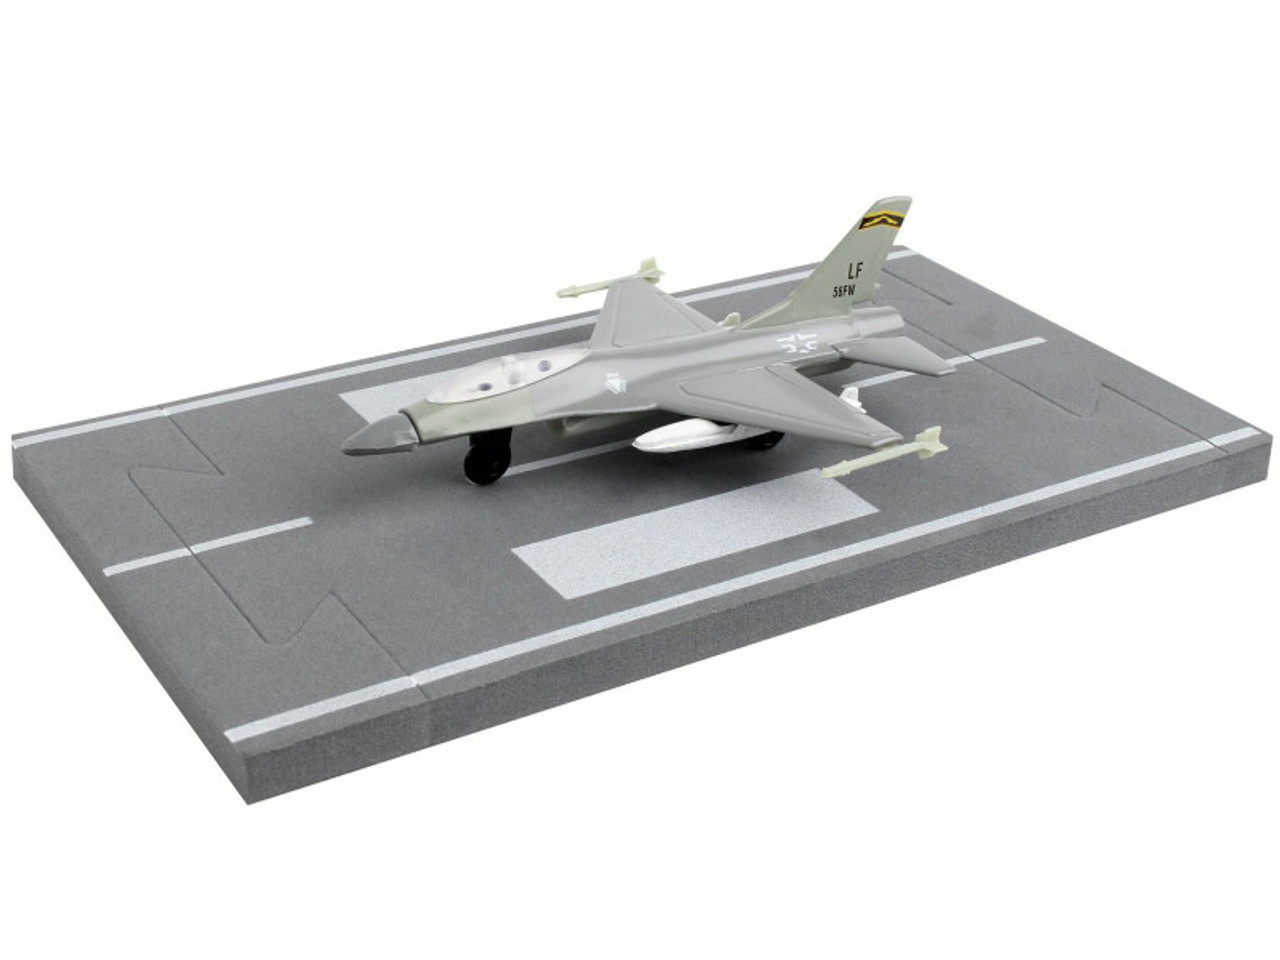 General Dynamics F-16 Fighting Falcon Fighter Aircraft Gray "United States Air Force" with Runway Section Diecast Model Airplane by Runway24